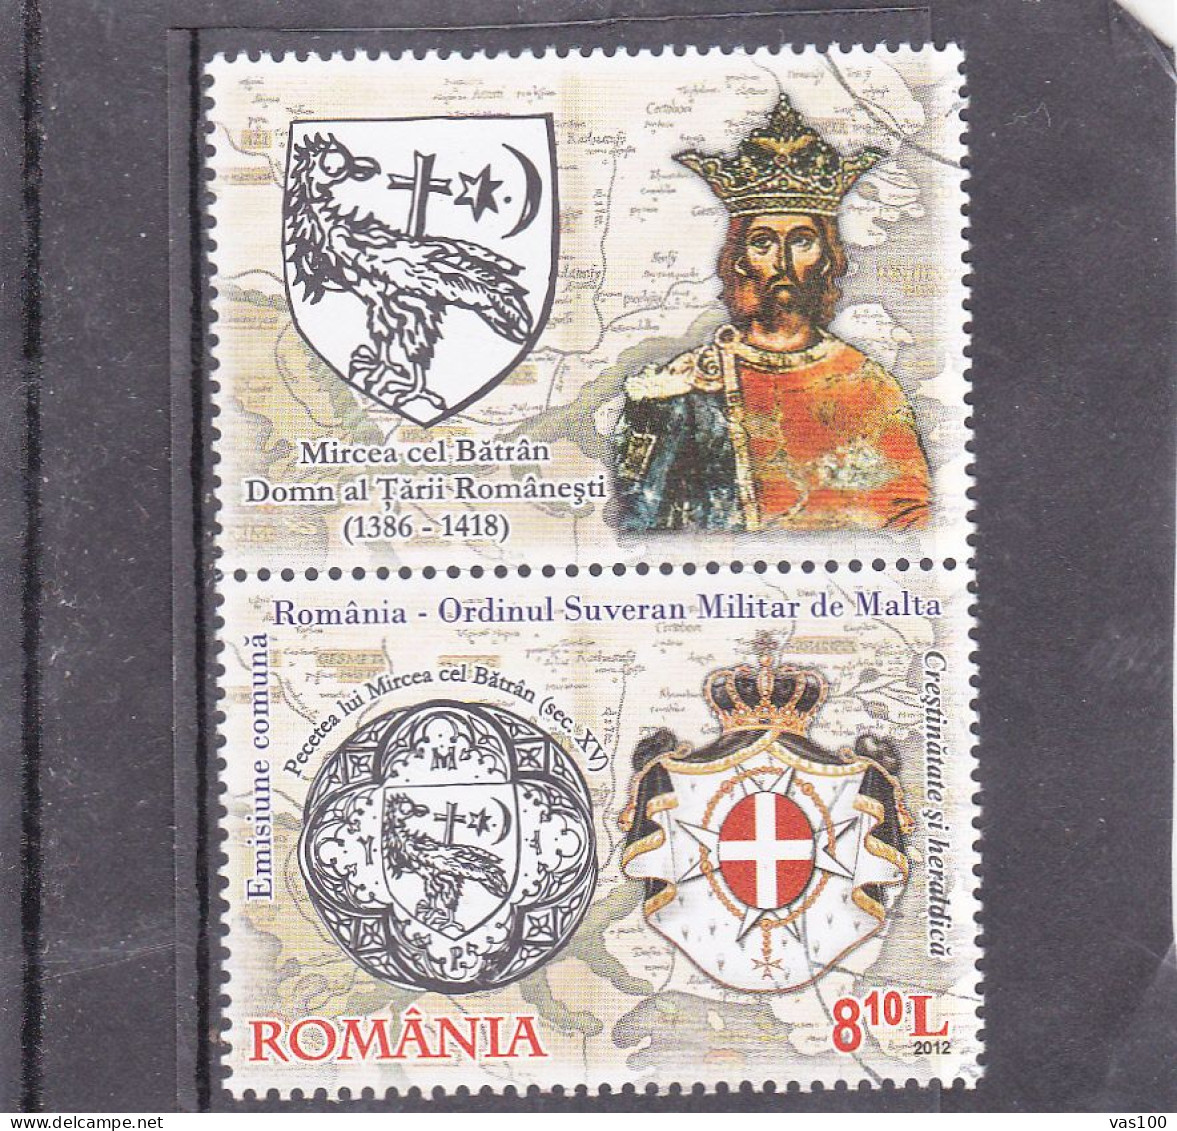 ROMANIA 2012 Relations With Sovereign Maltese Order USED + LABELS. Michel 6667 - Usati